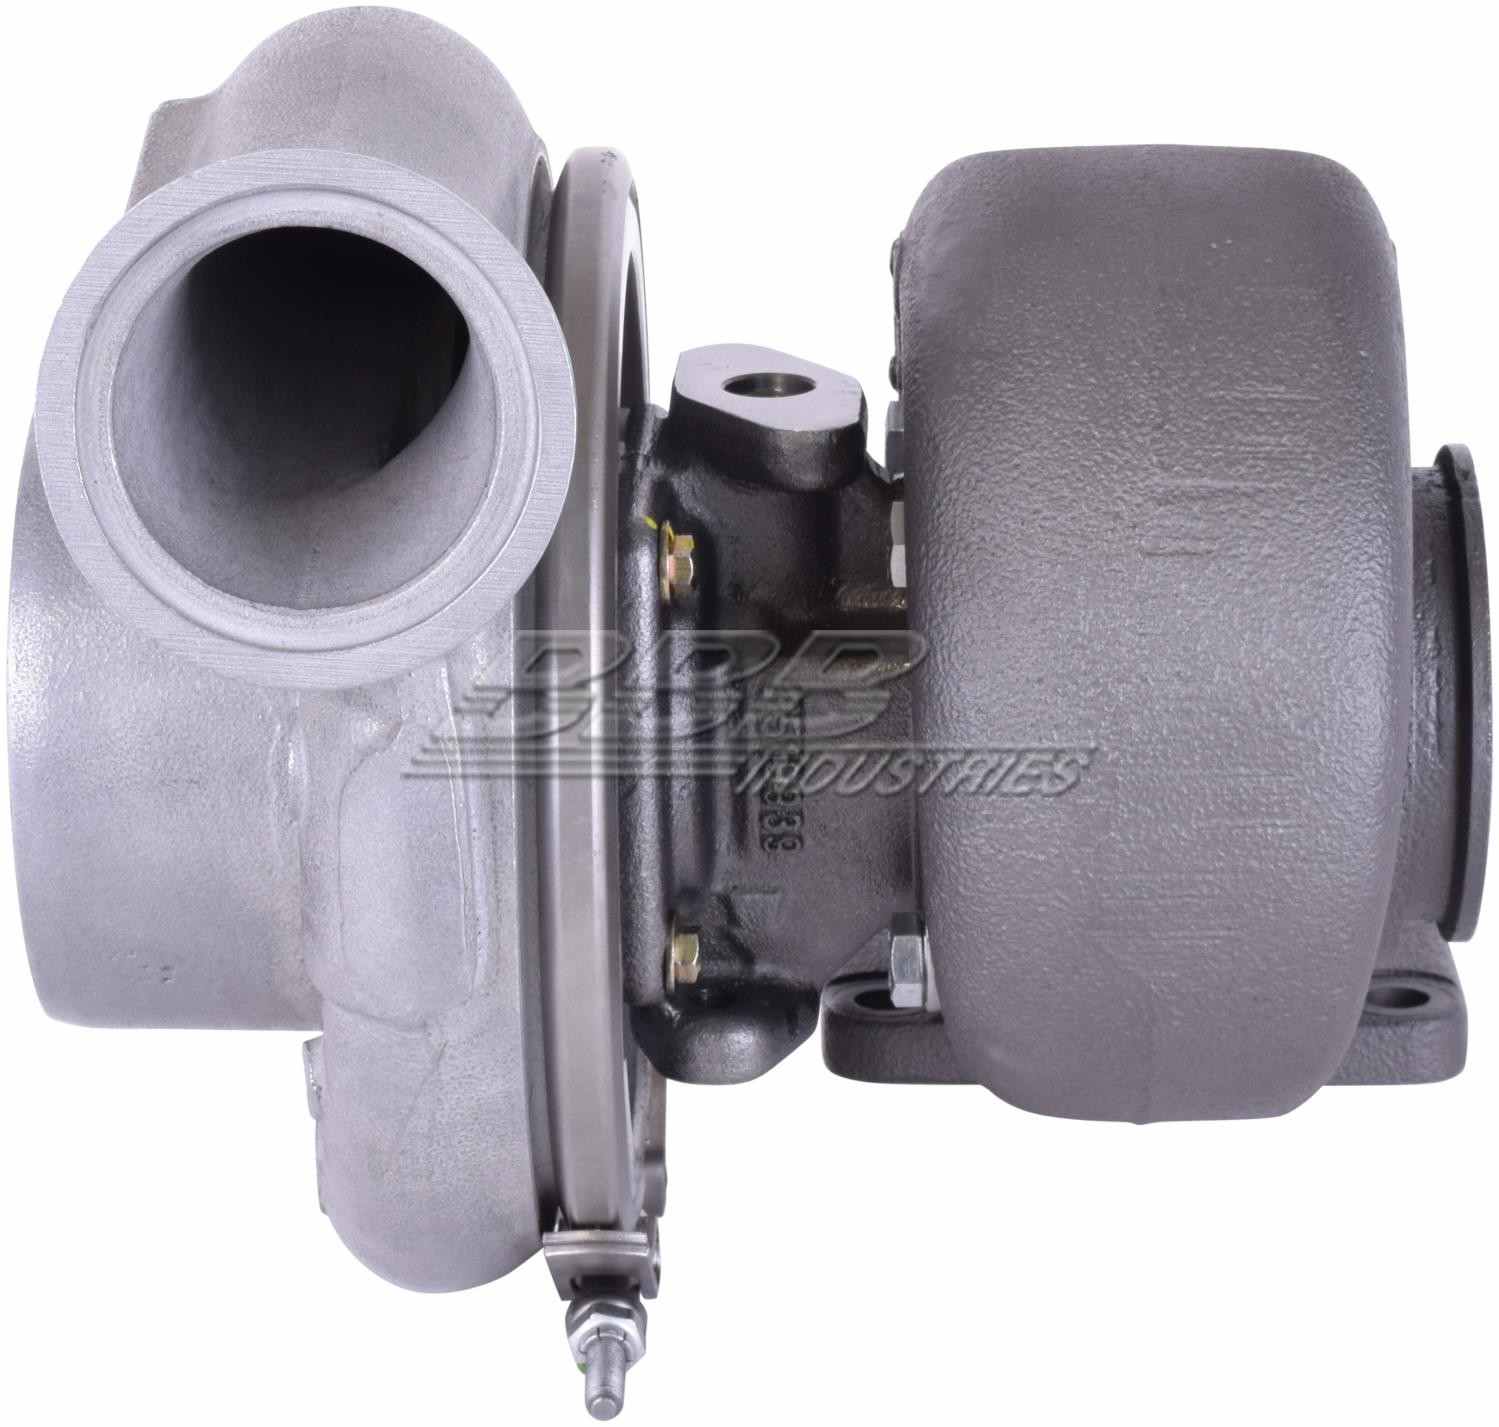 OE-TurboPower Remanufactured Turbocharger  top view frsport D2011